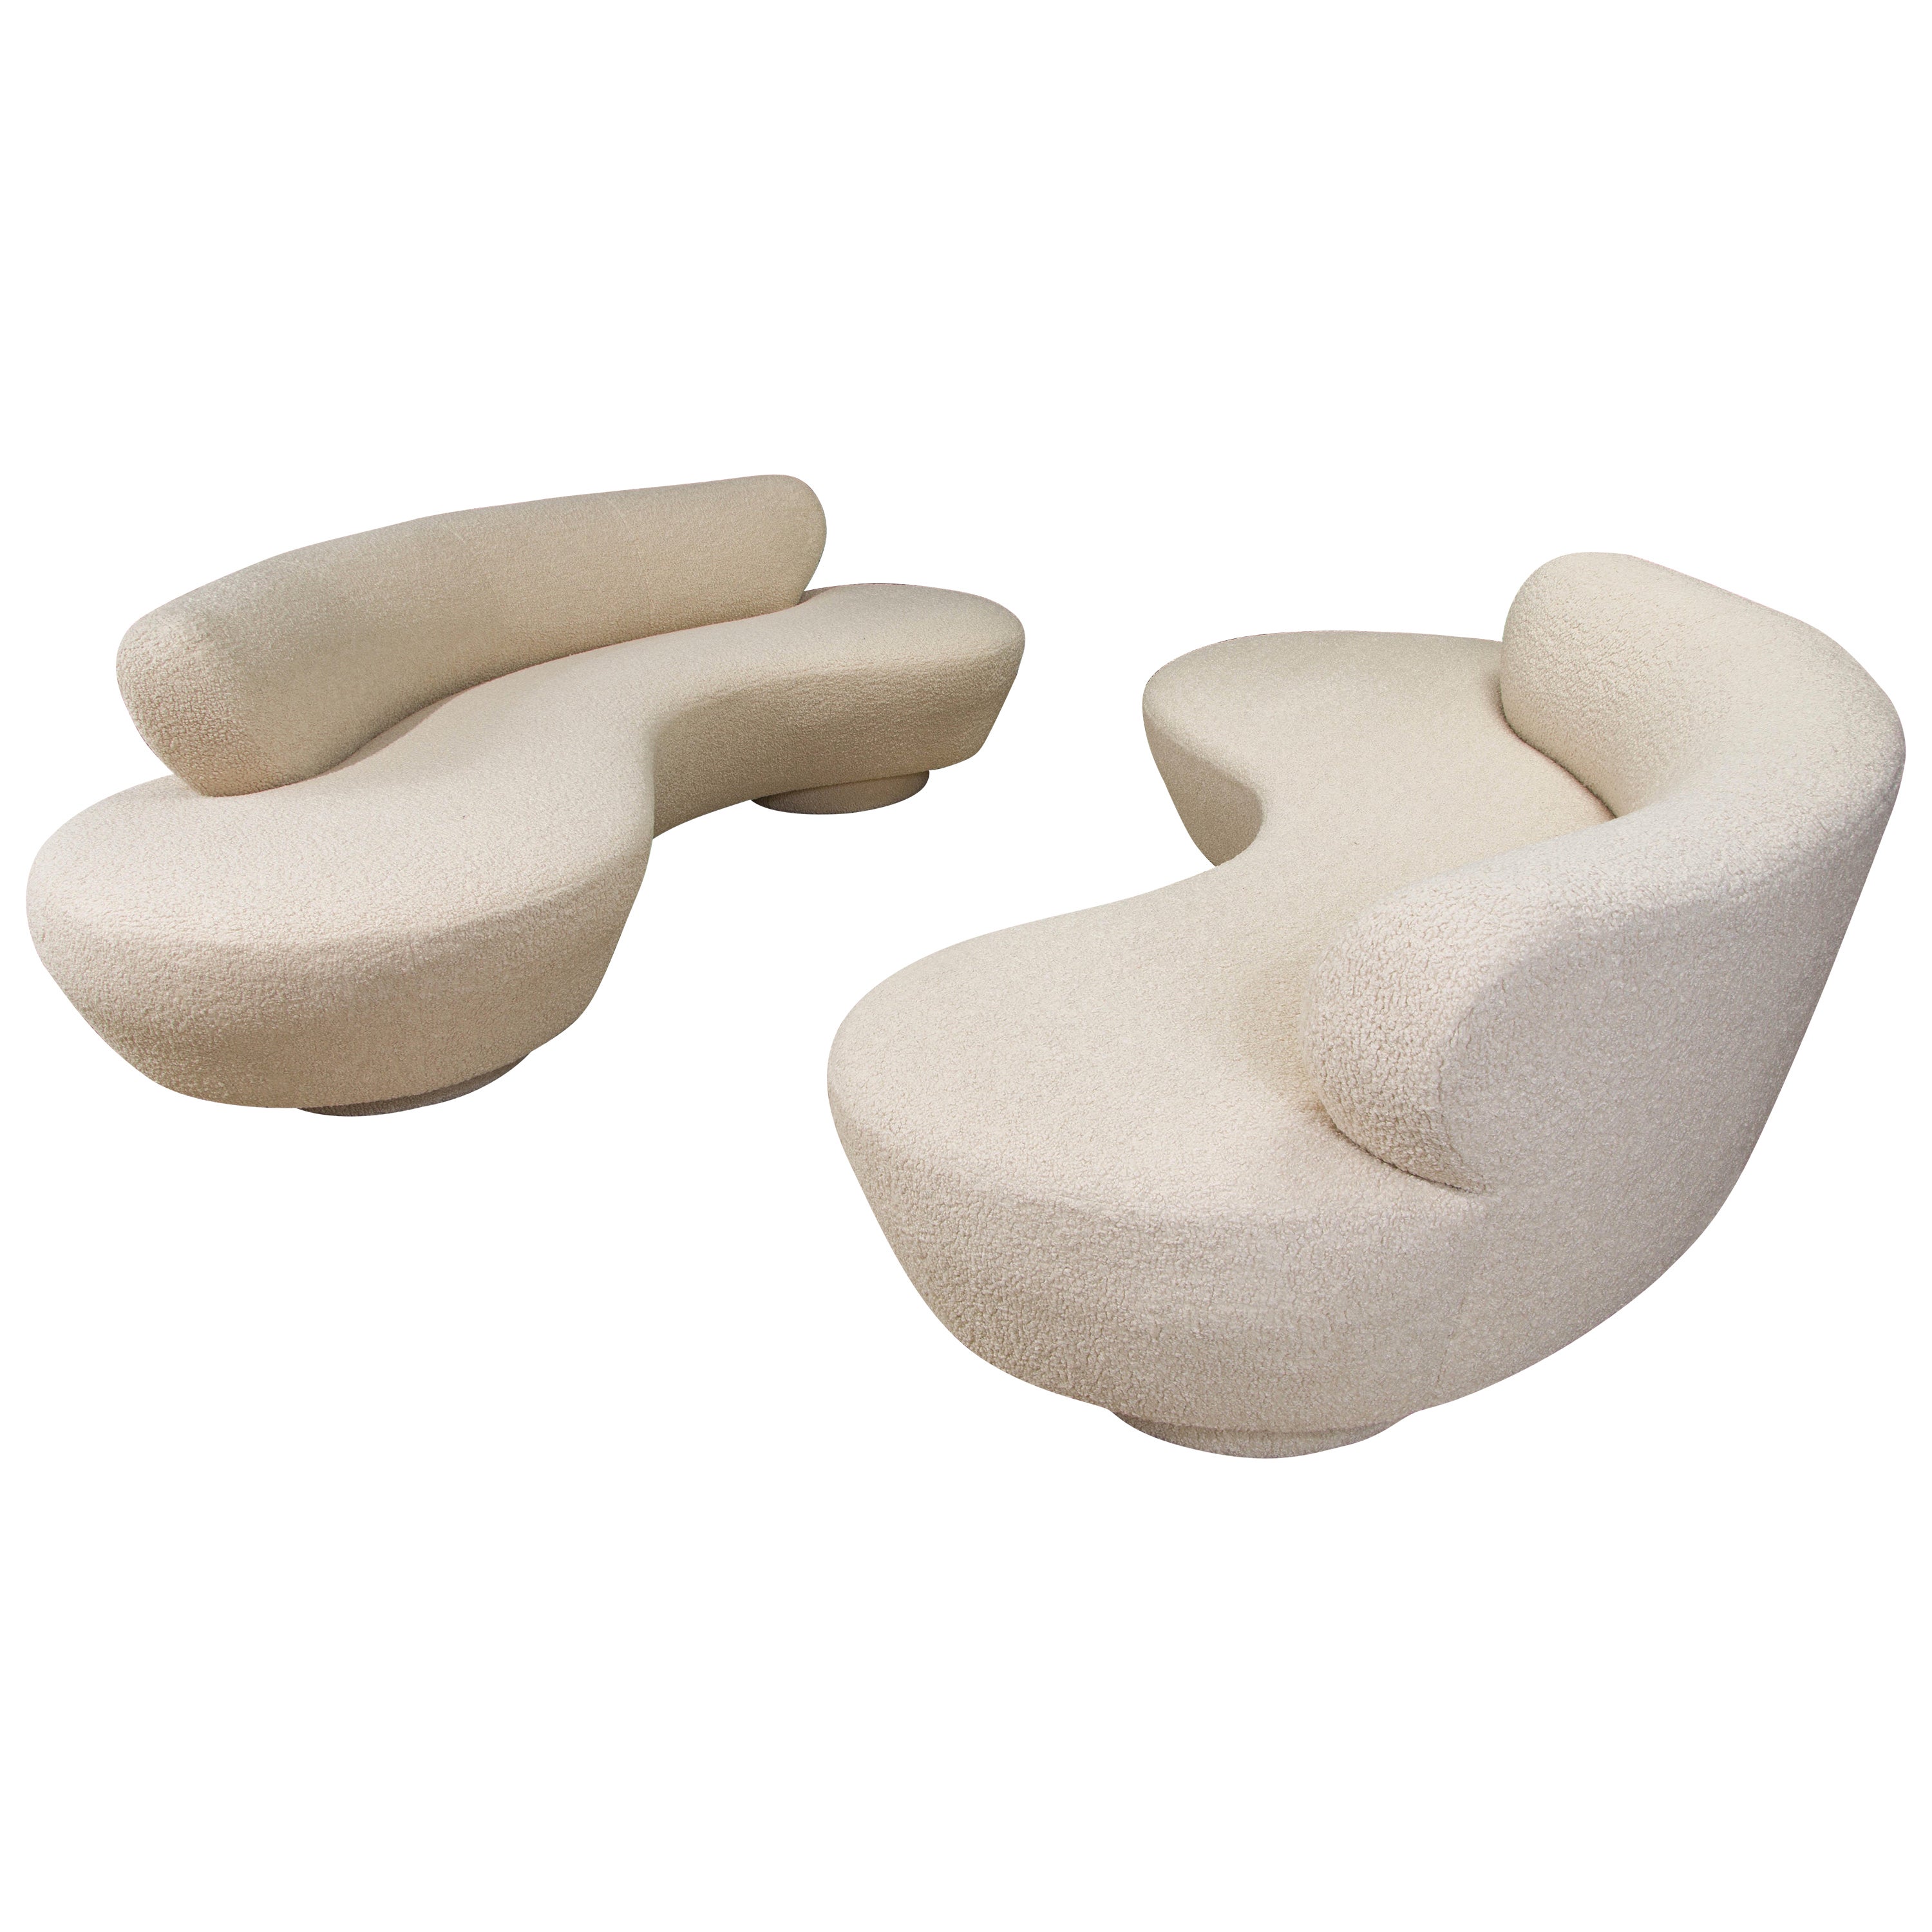 Vladimir Kagan for Directional 'Cloud' Sofas in New Nubby Bouclé, c 1980, Signed